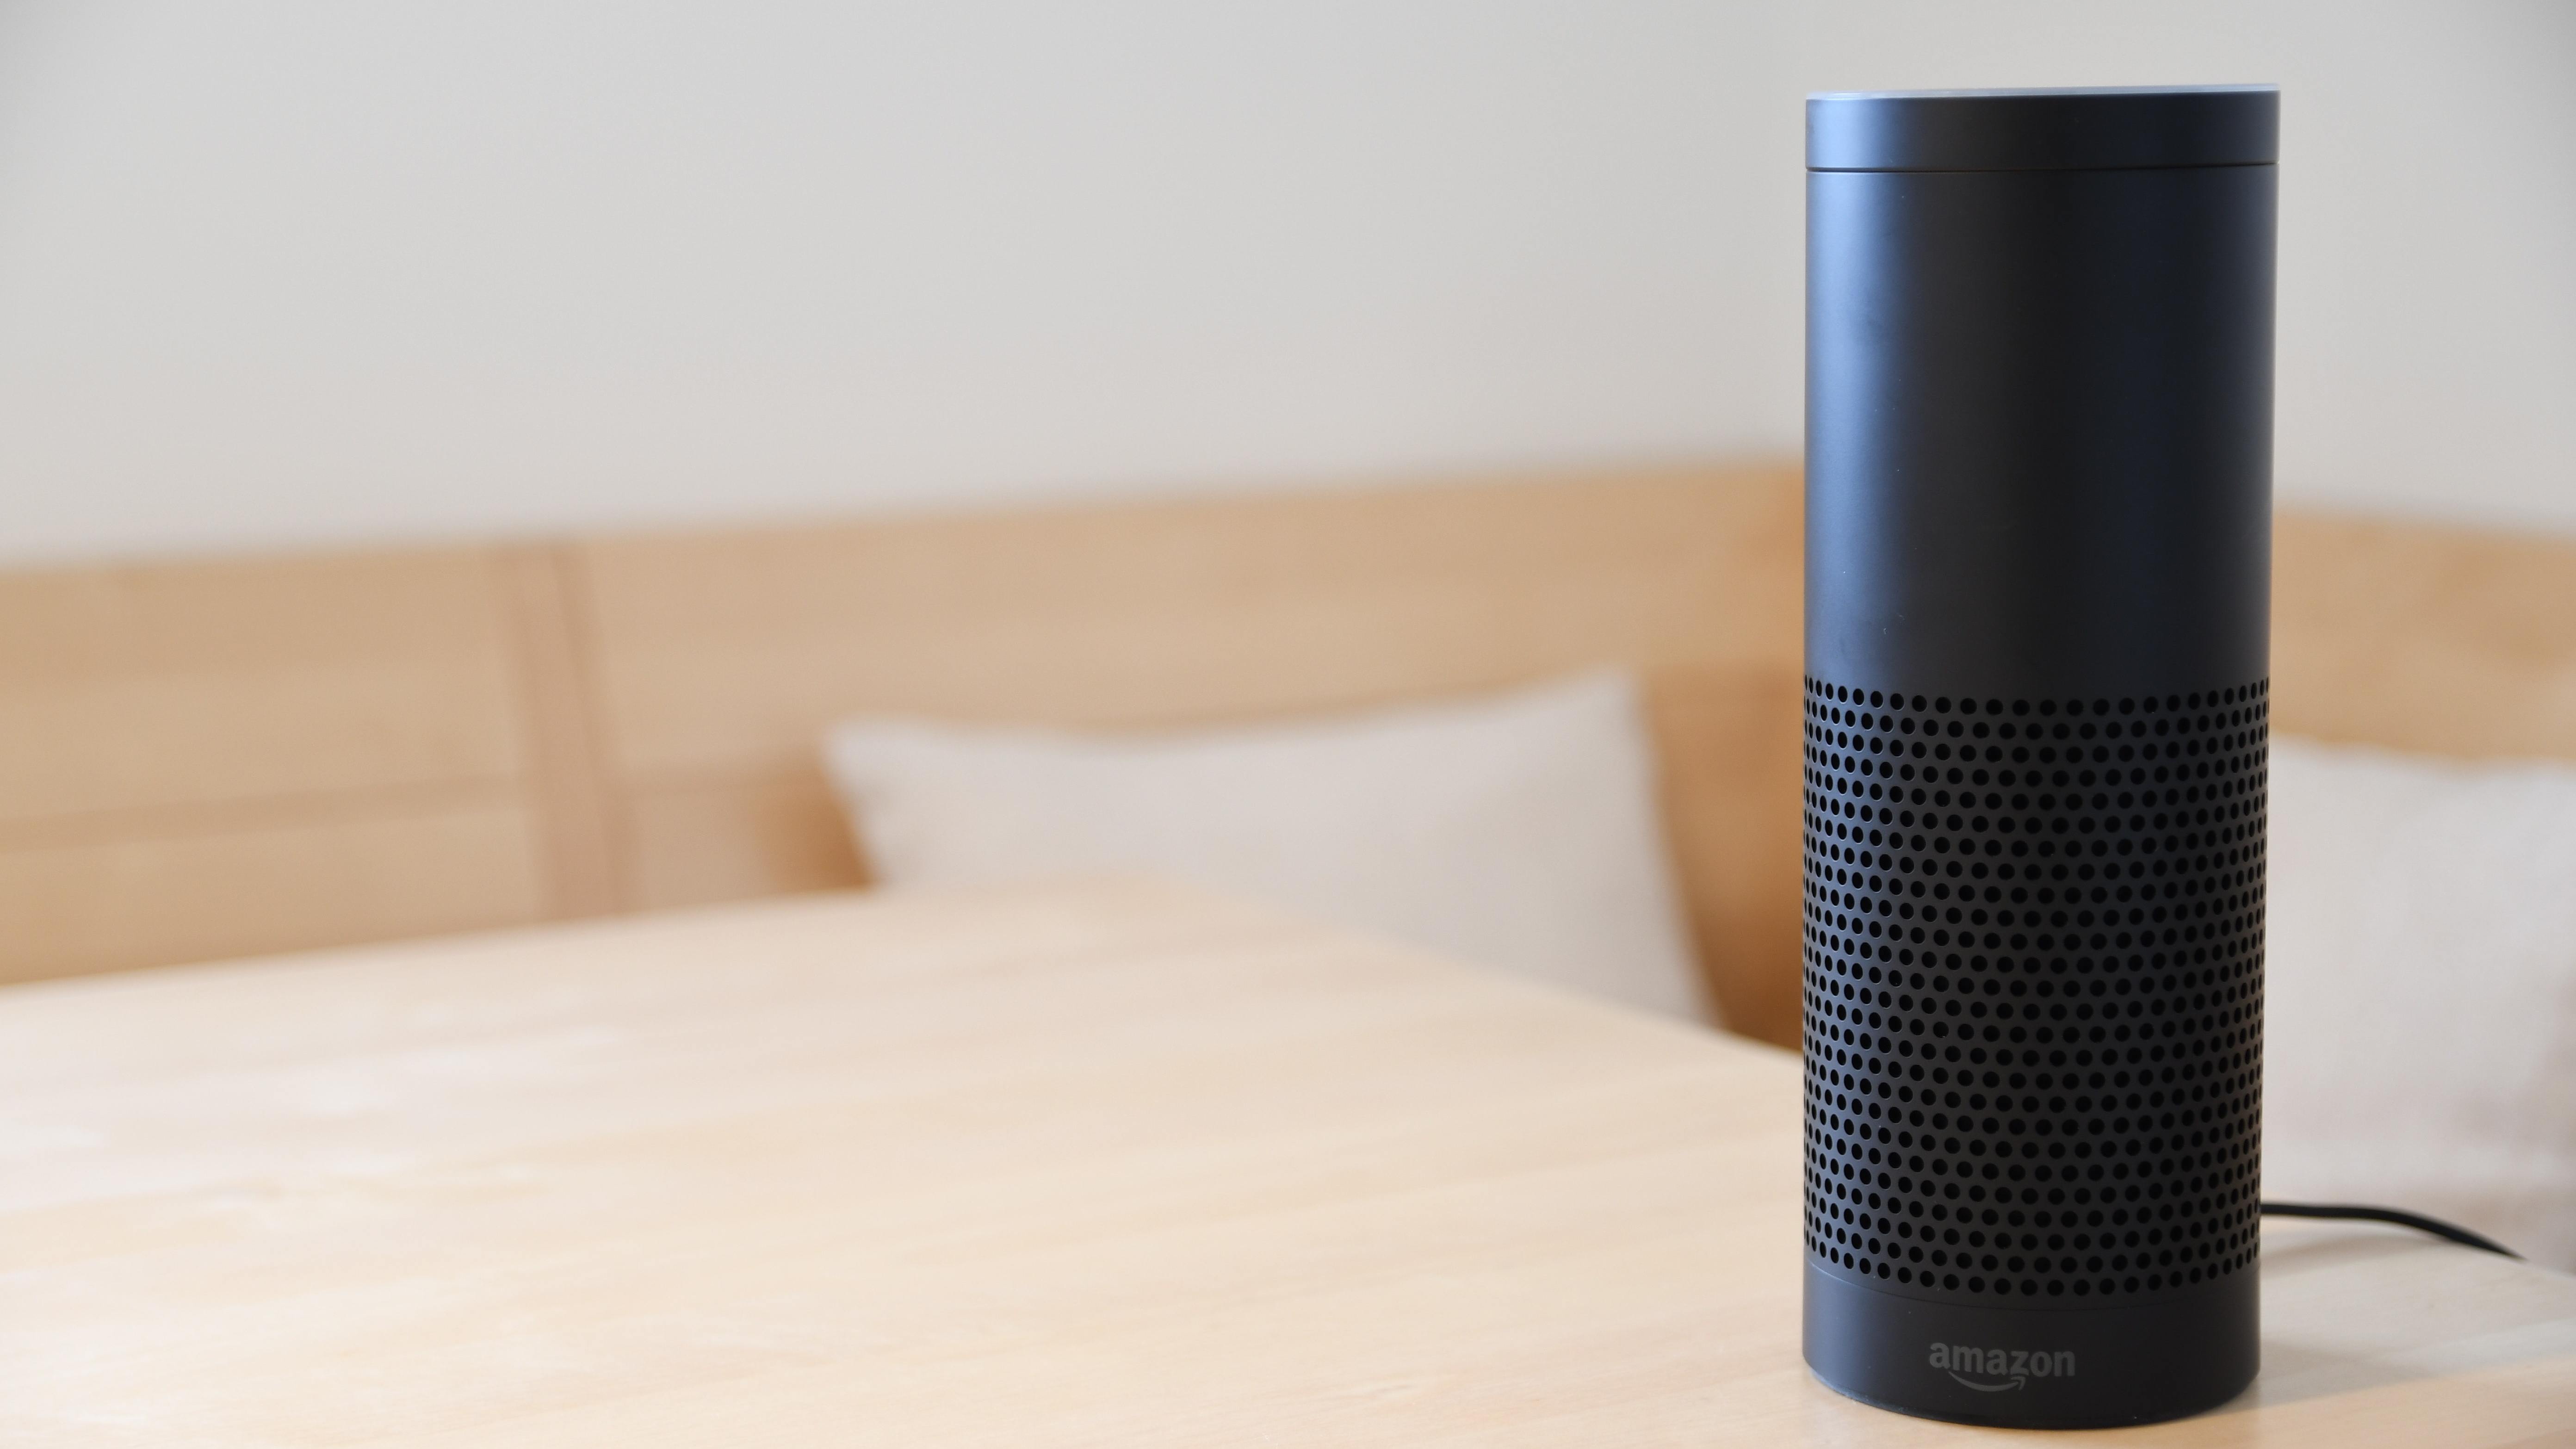 Make A Houseguest Guide With Alexa